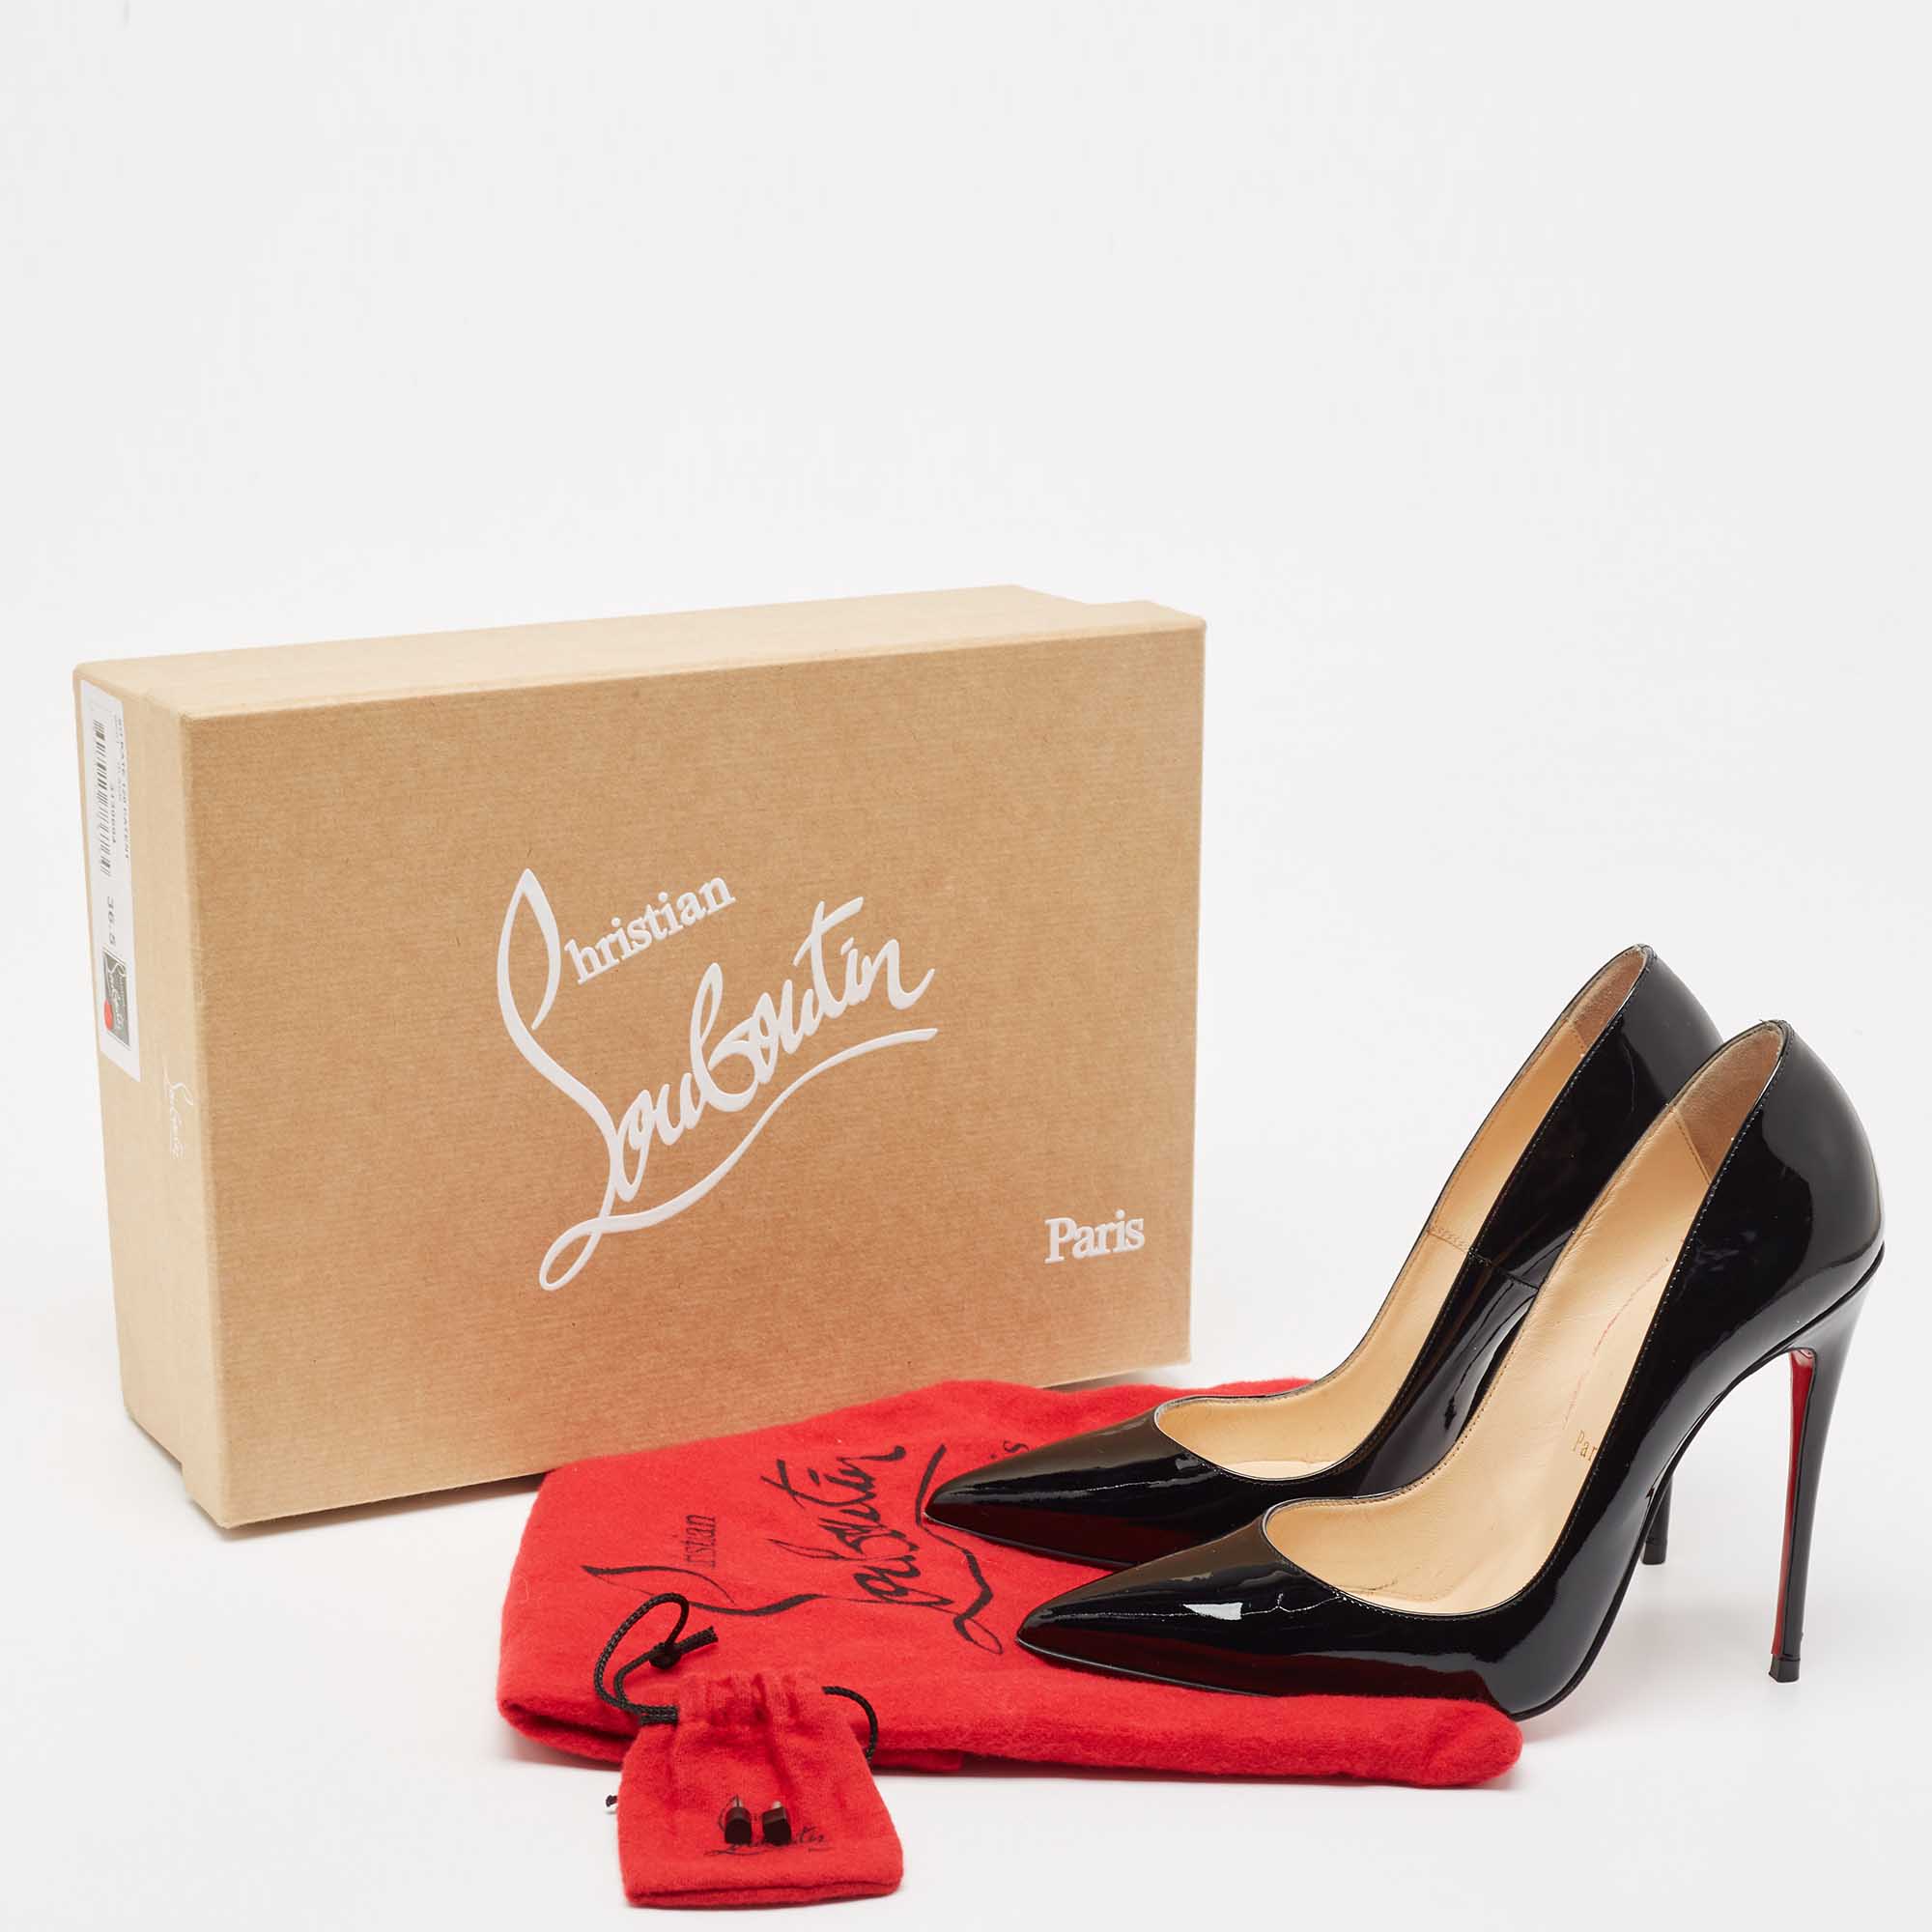 Christian Louboutin Black Patent Leather So Kate Pointed Toe Pumps Size 36.5